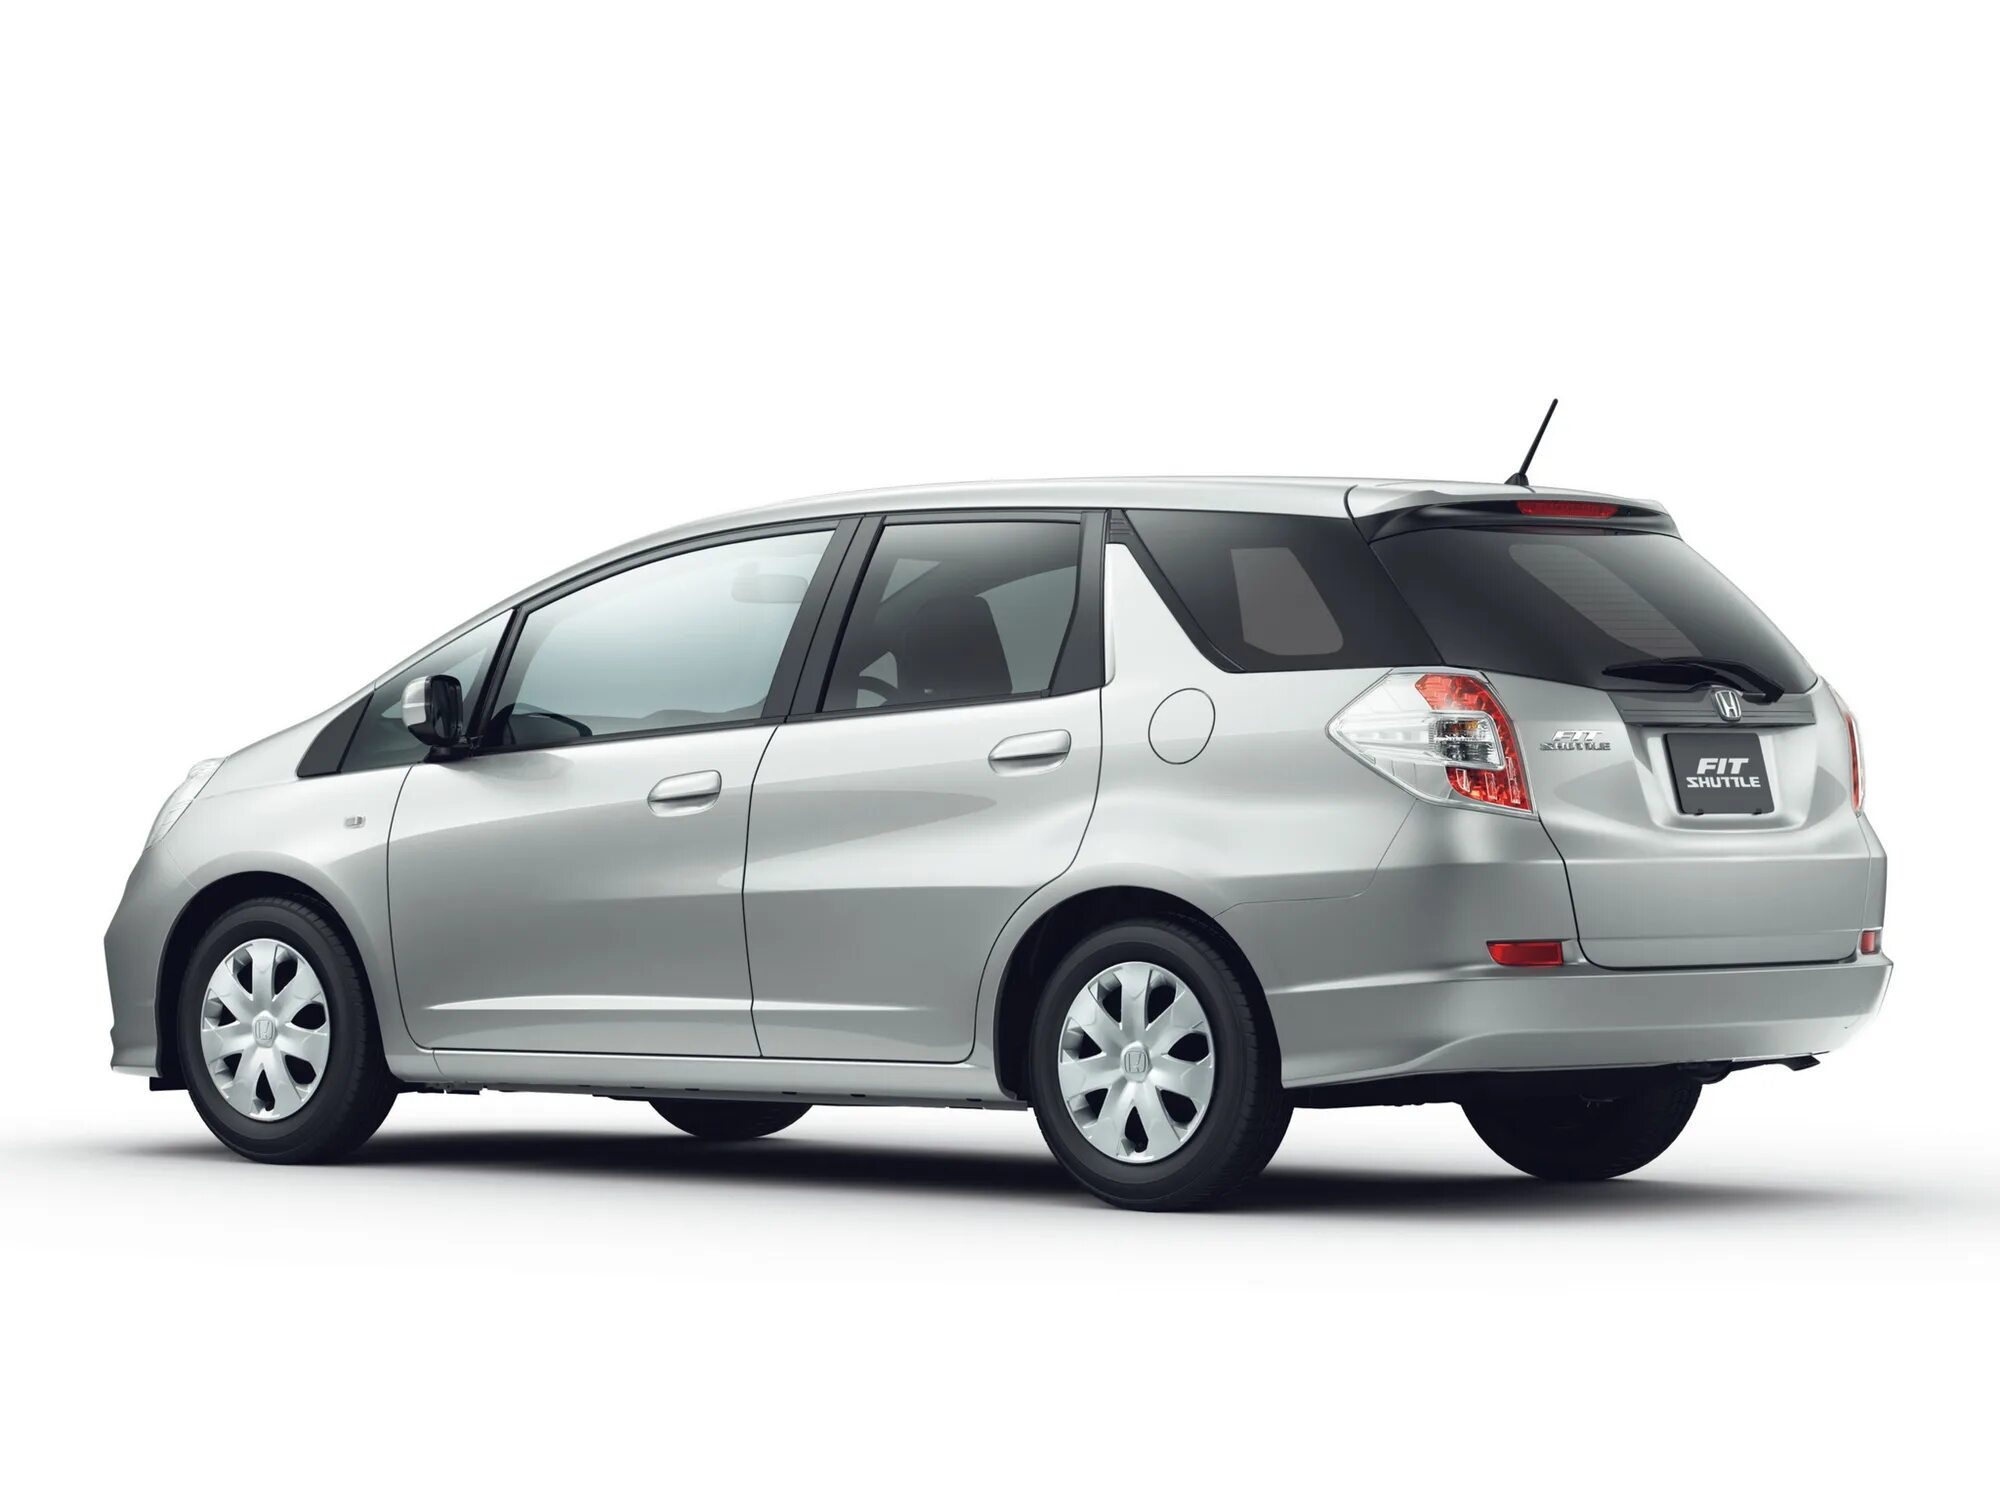 Honda Fit Shuttle. Honda Fit Shuttle Hybrid 2014. Honda Fit Shuttle 2013-2015. Хонда фит шаттл 2014.